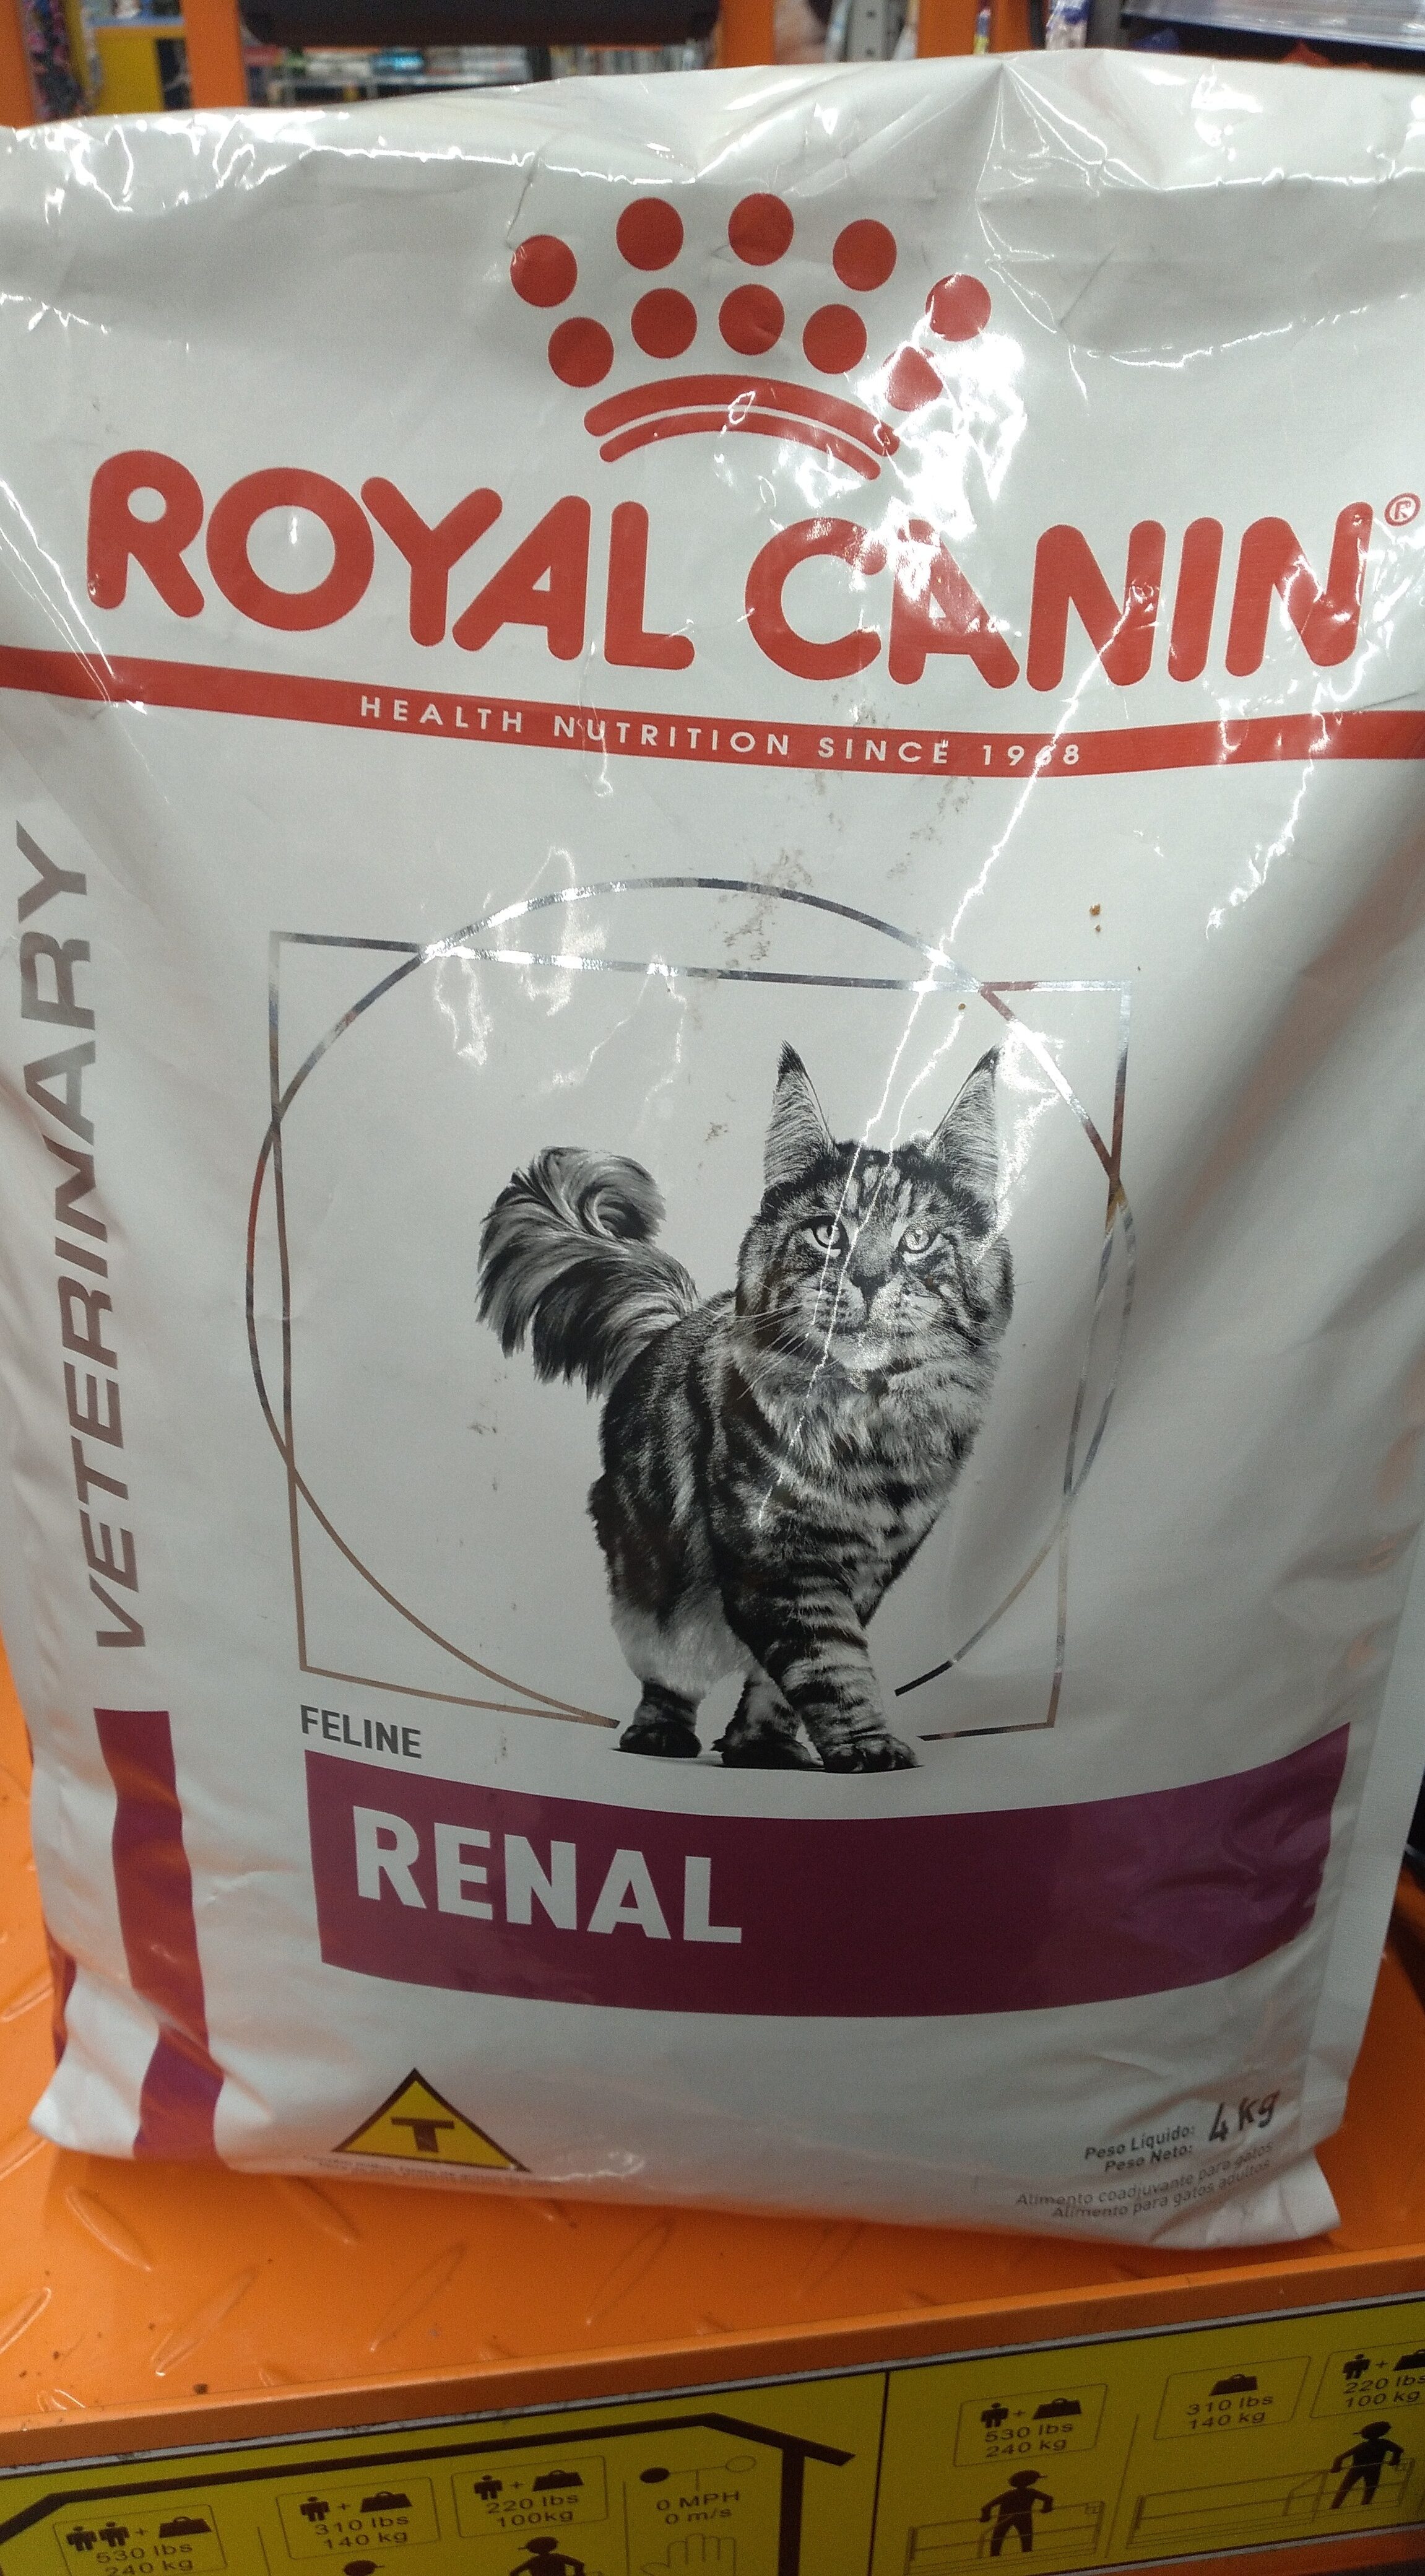 Royal canin renal 4kg - Product - pt